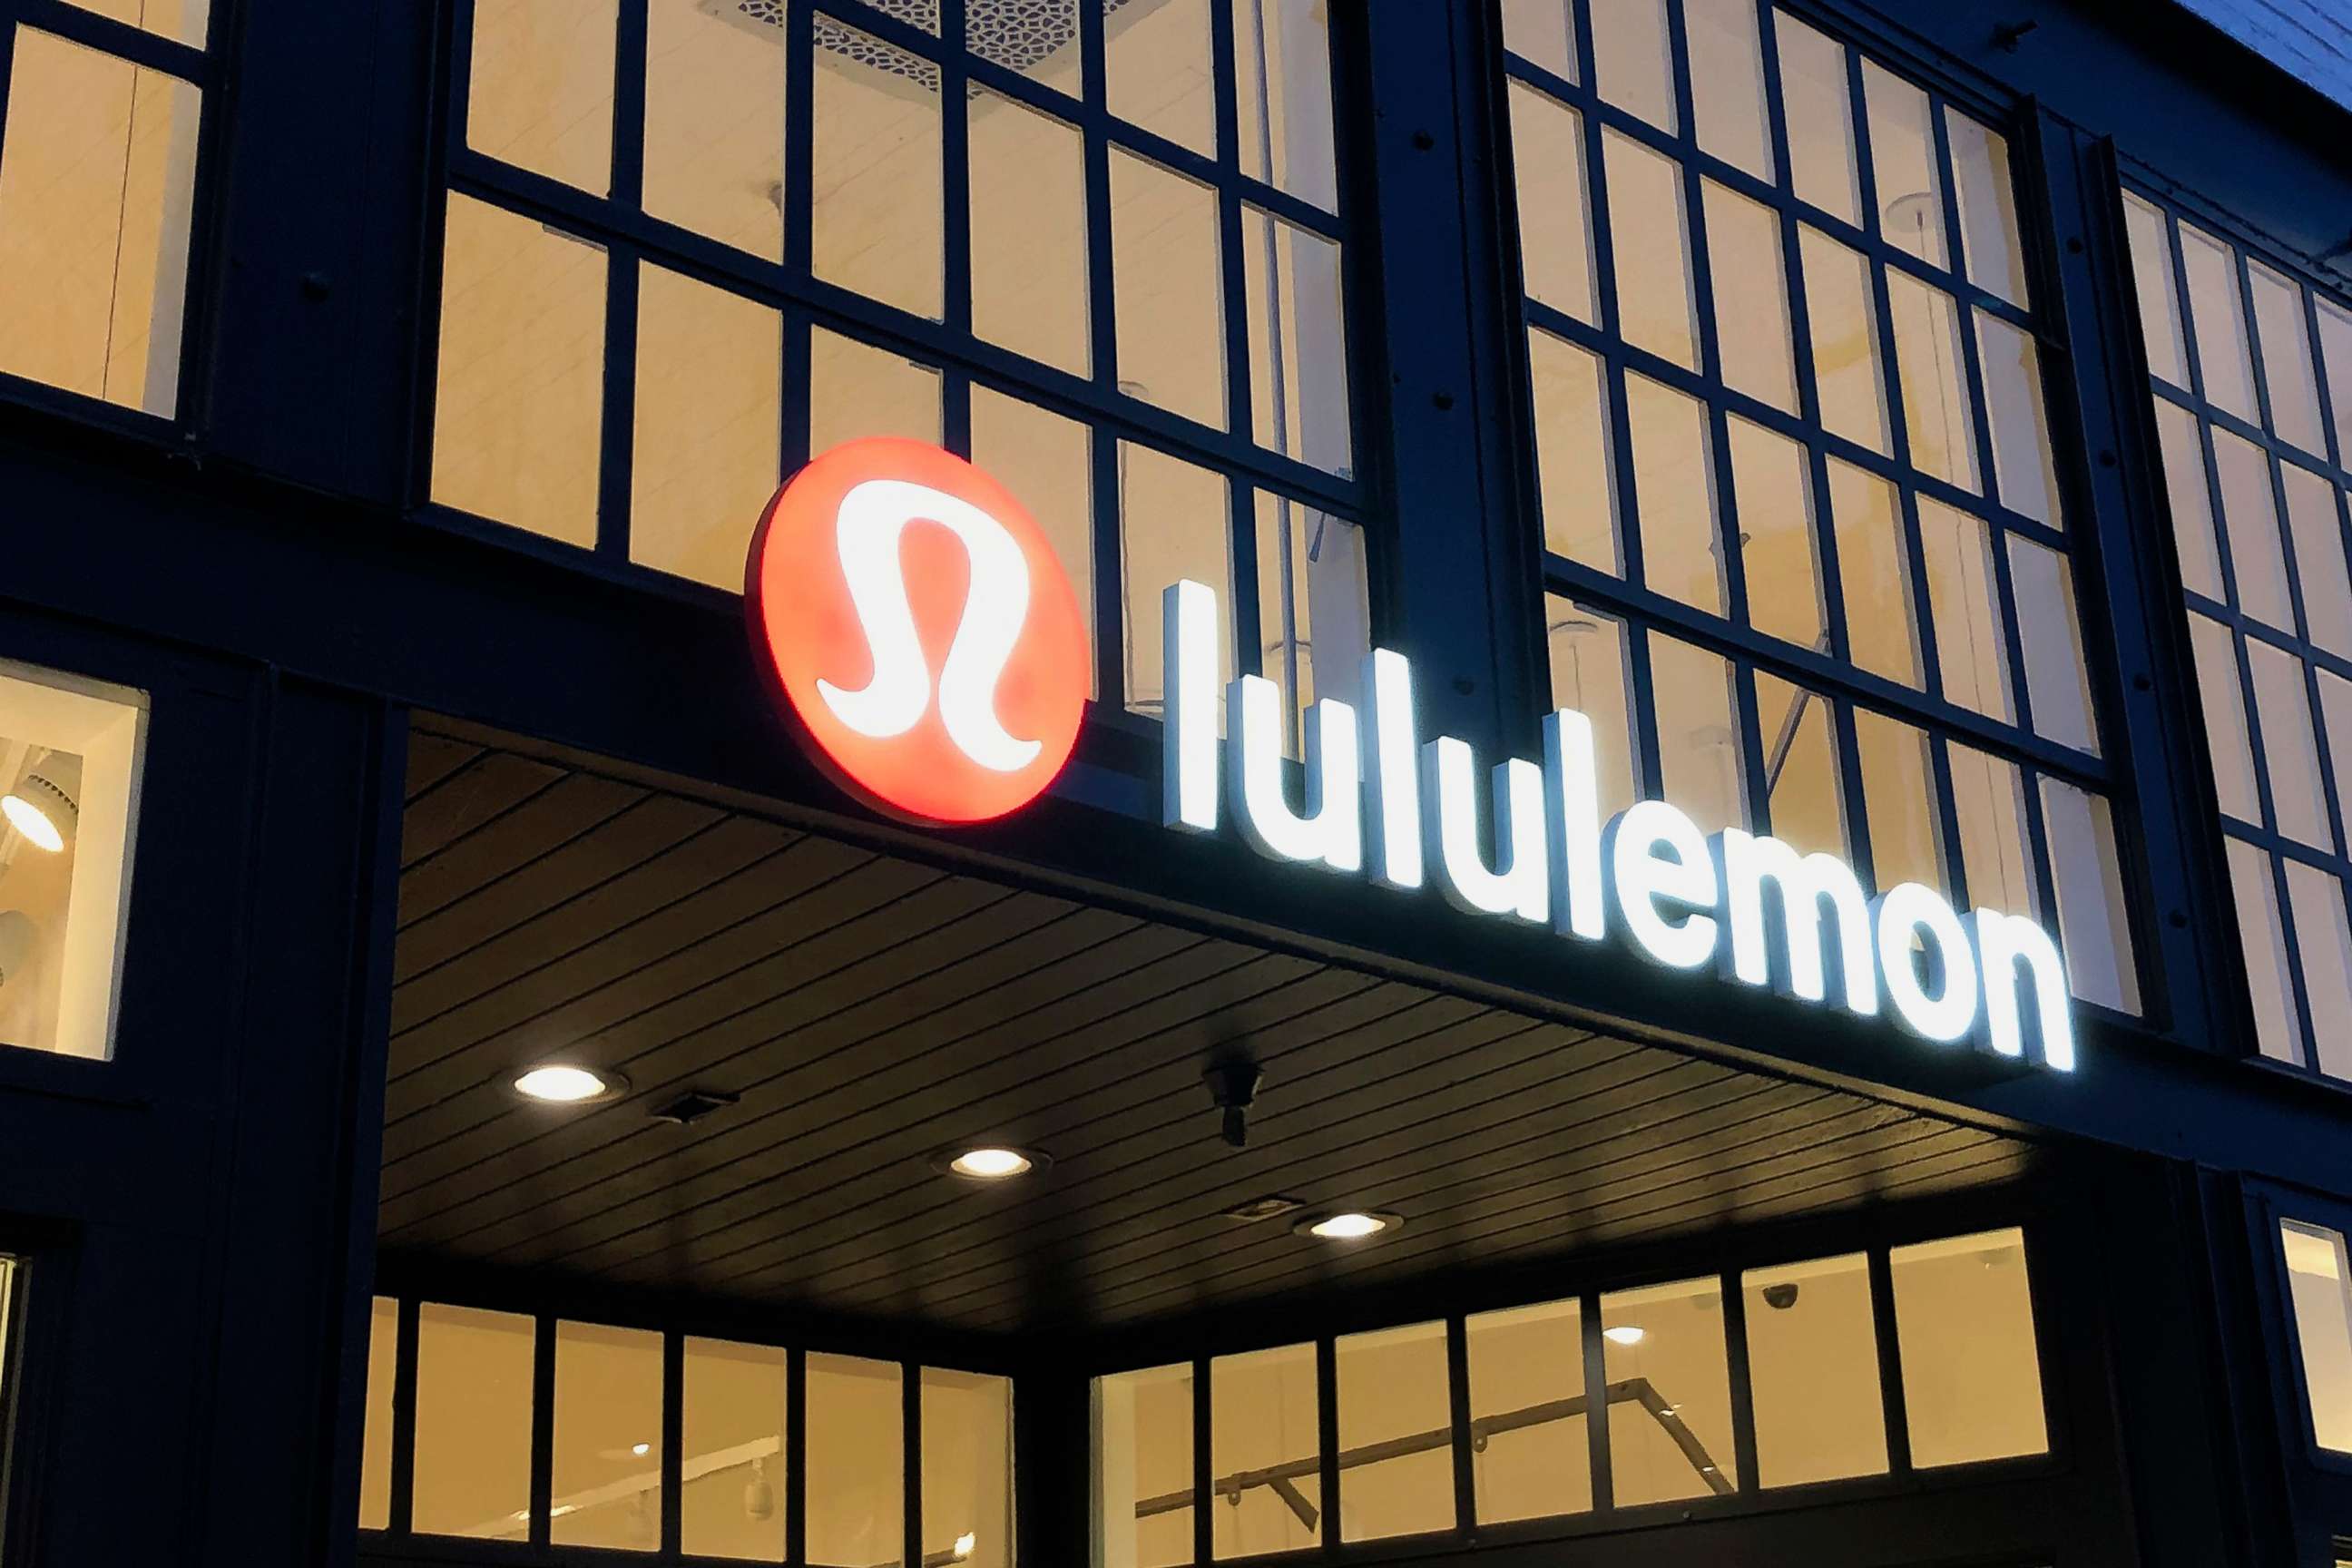 Lululemon to acquire at-home exercise startup Mirror for $500